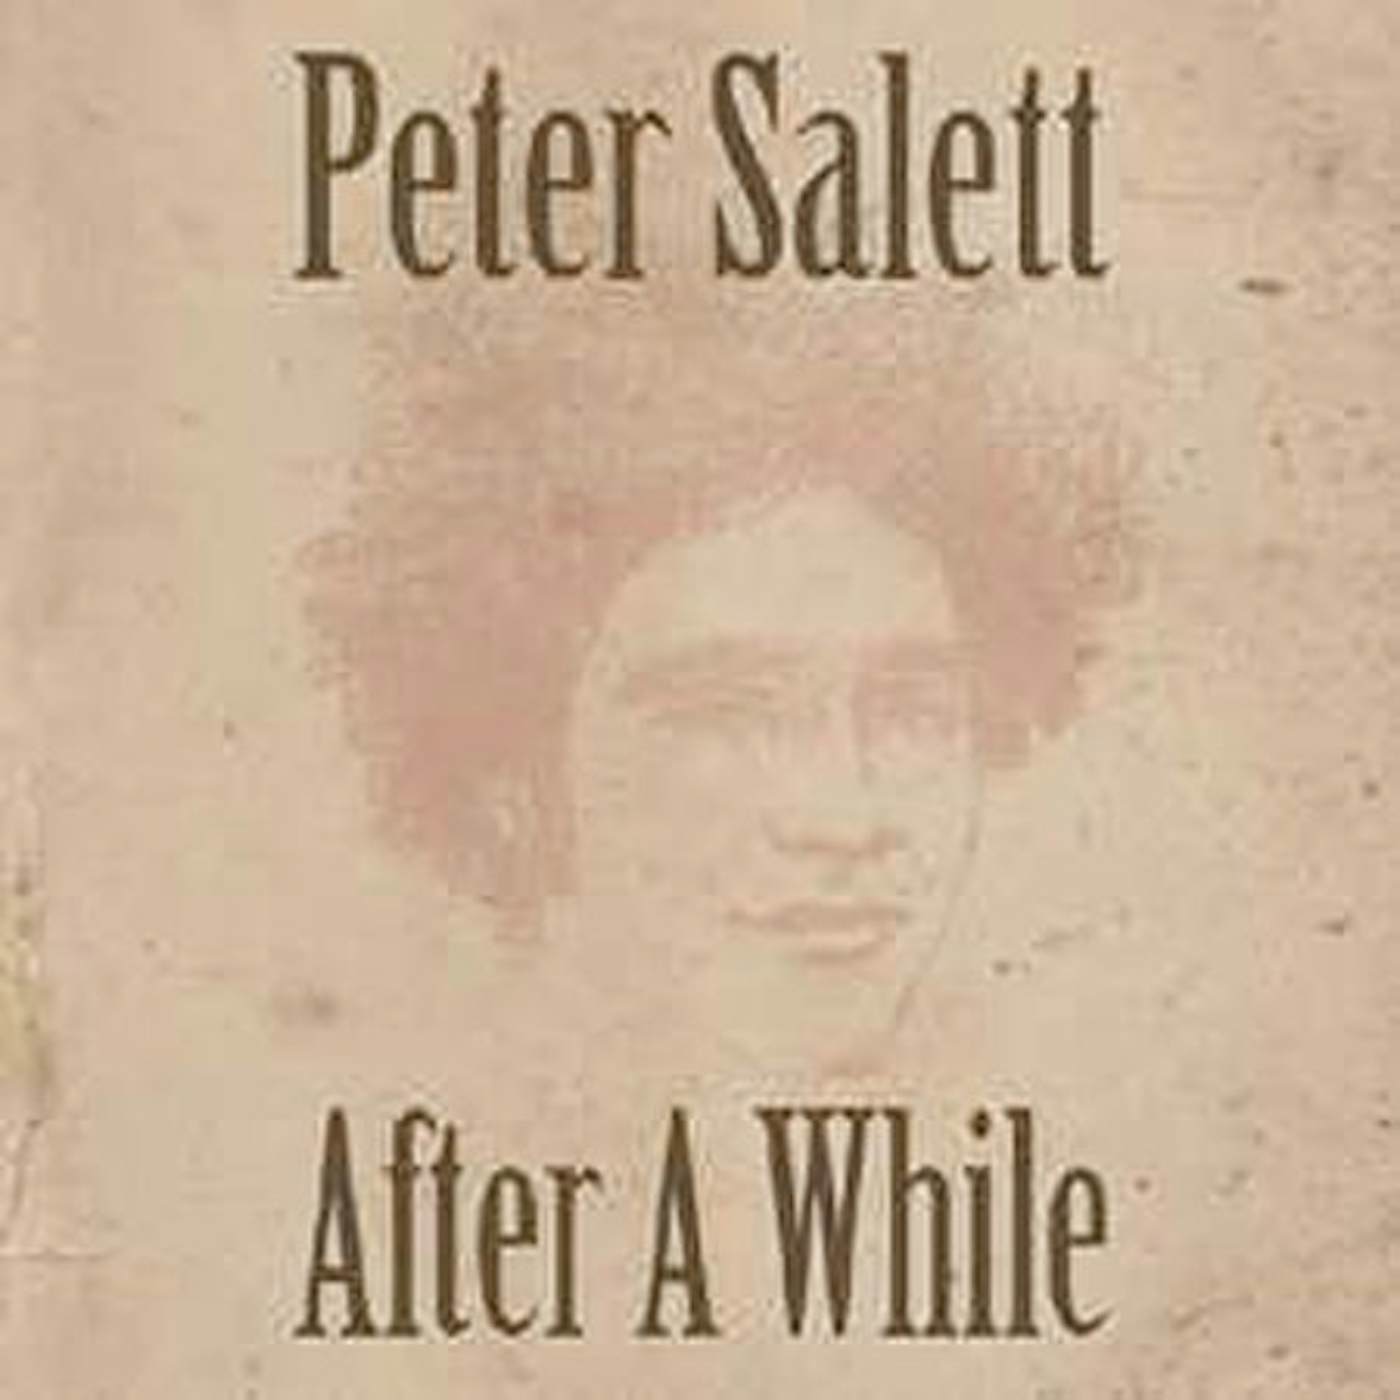 Peter Salett AFTER A WHILE CD